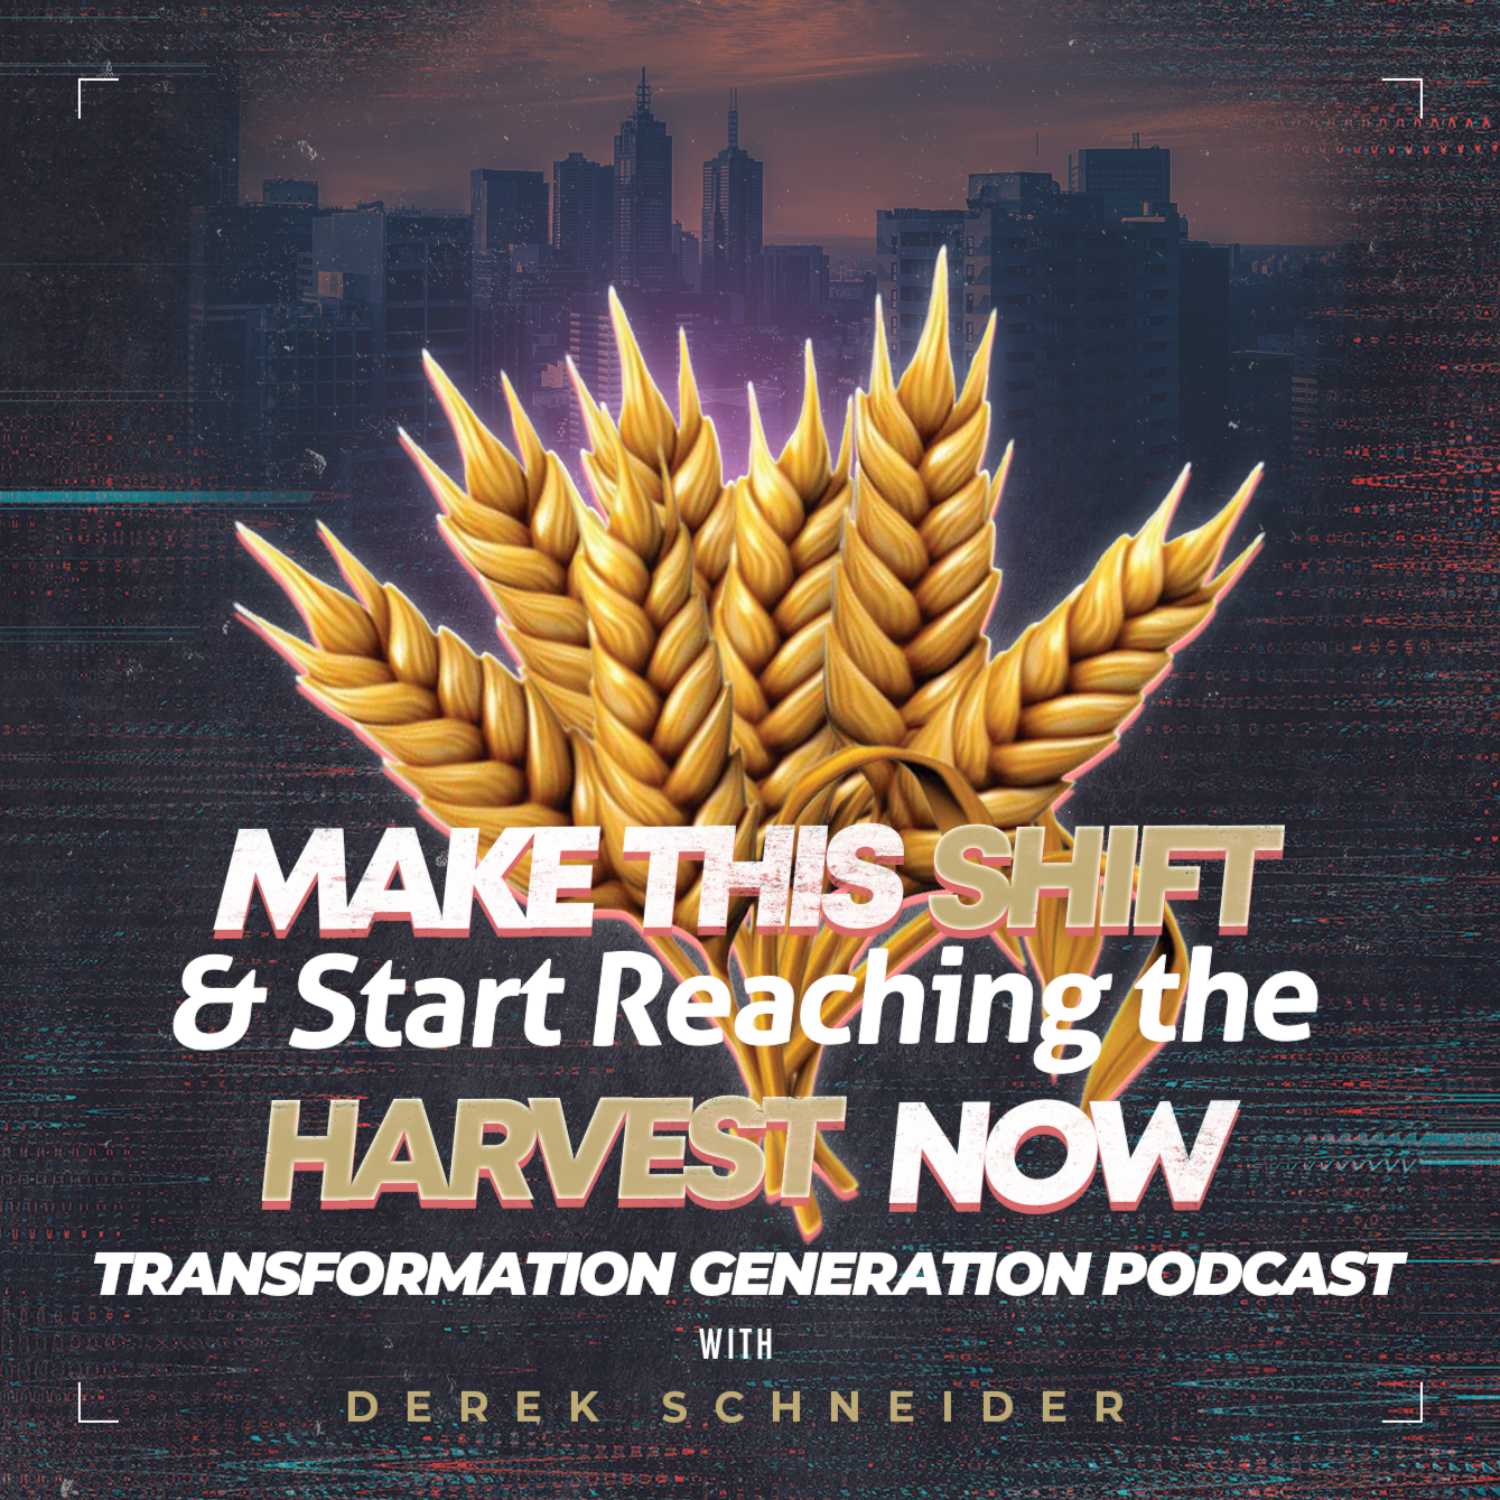 “Make This Shift and Start Reaching the Harvest Now”